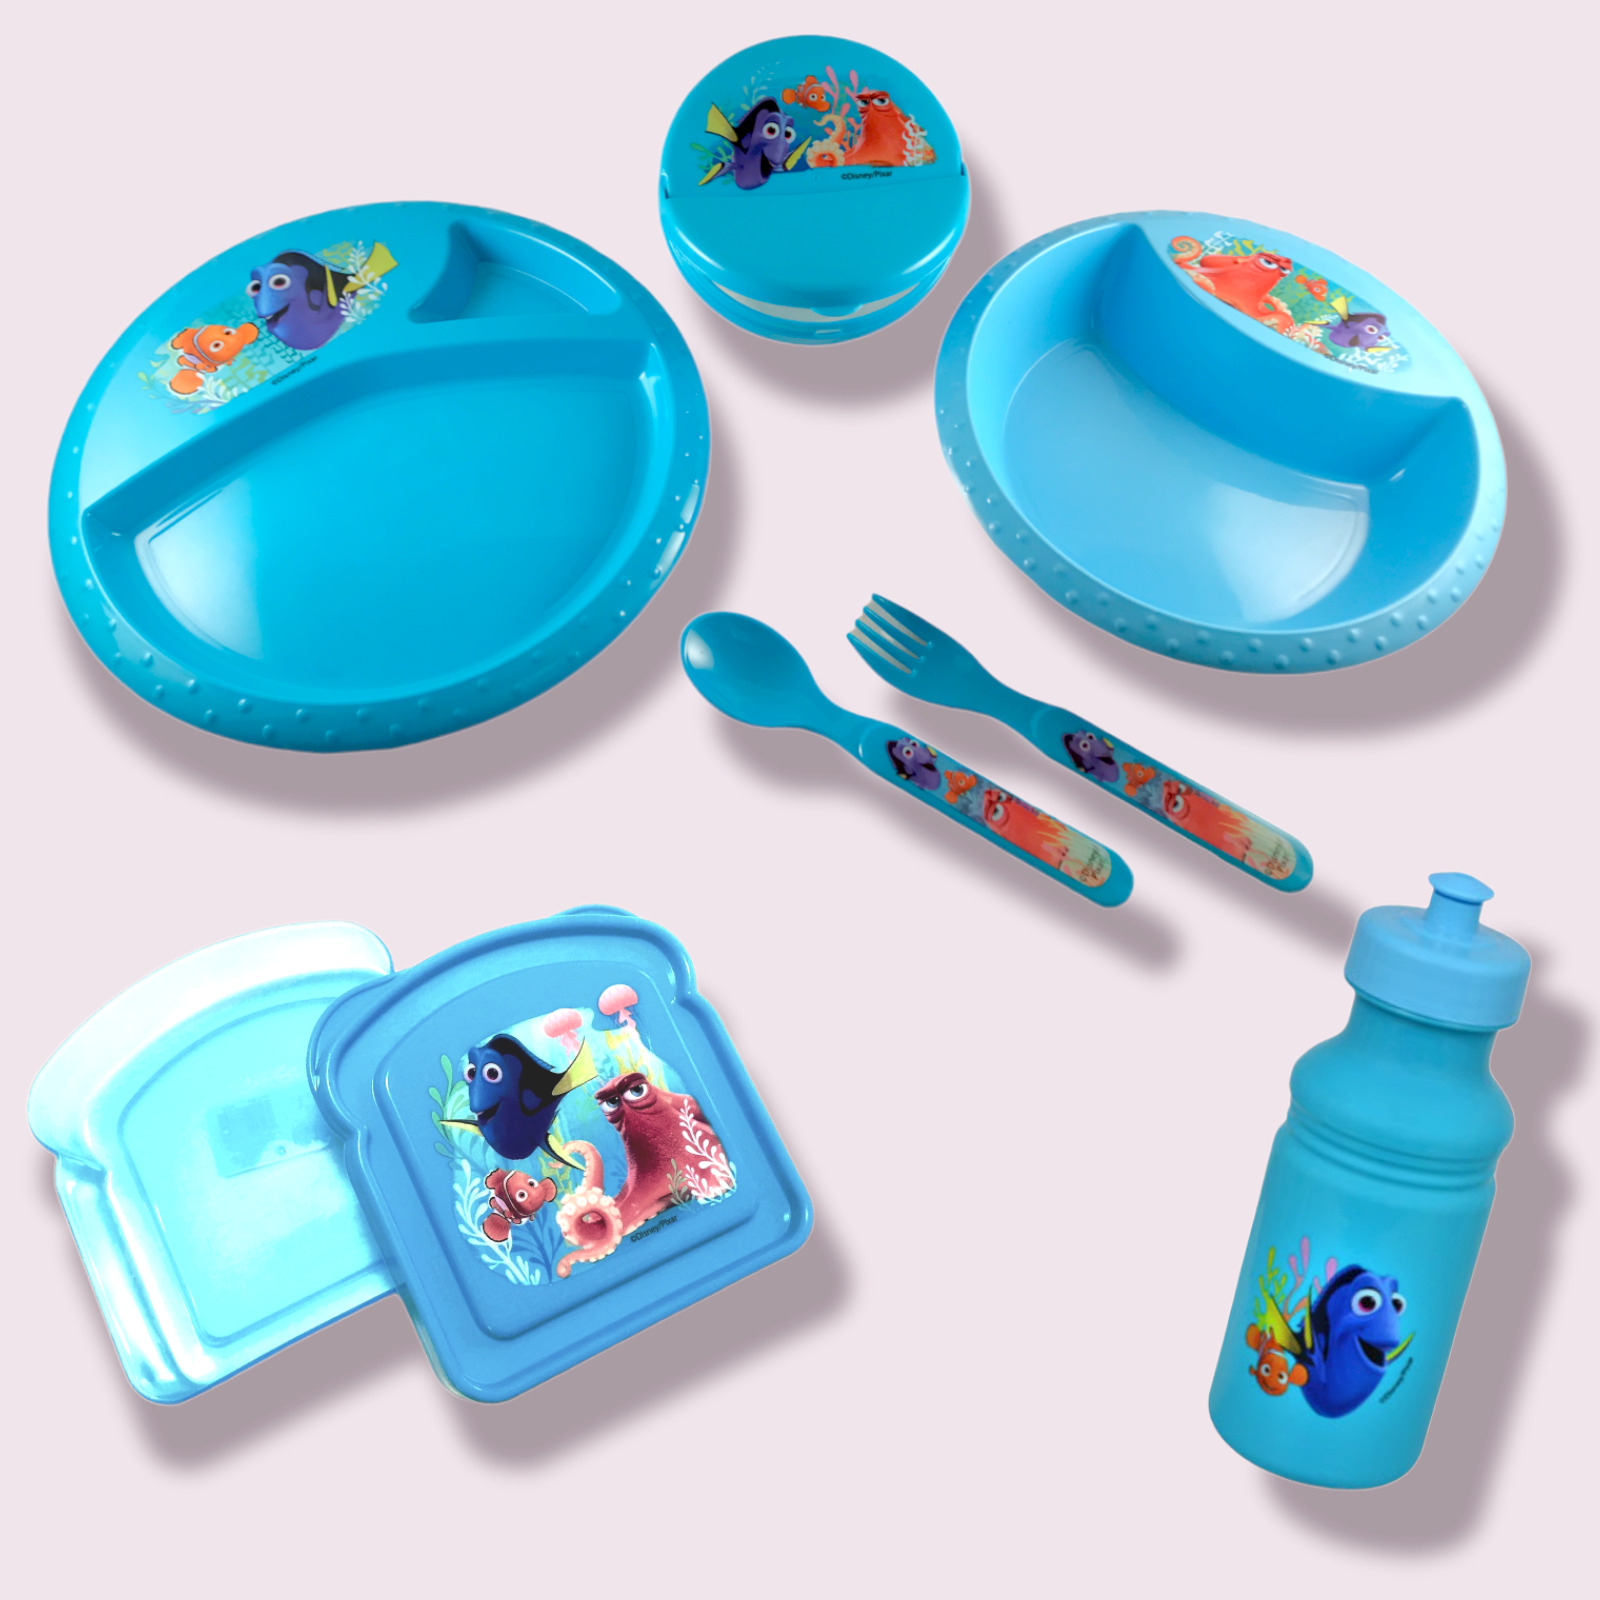 Kids Bpa Free Lunch Dinnerware Mix And Match Your Set Disney Finding Dory